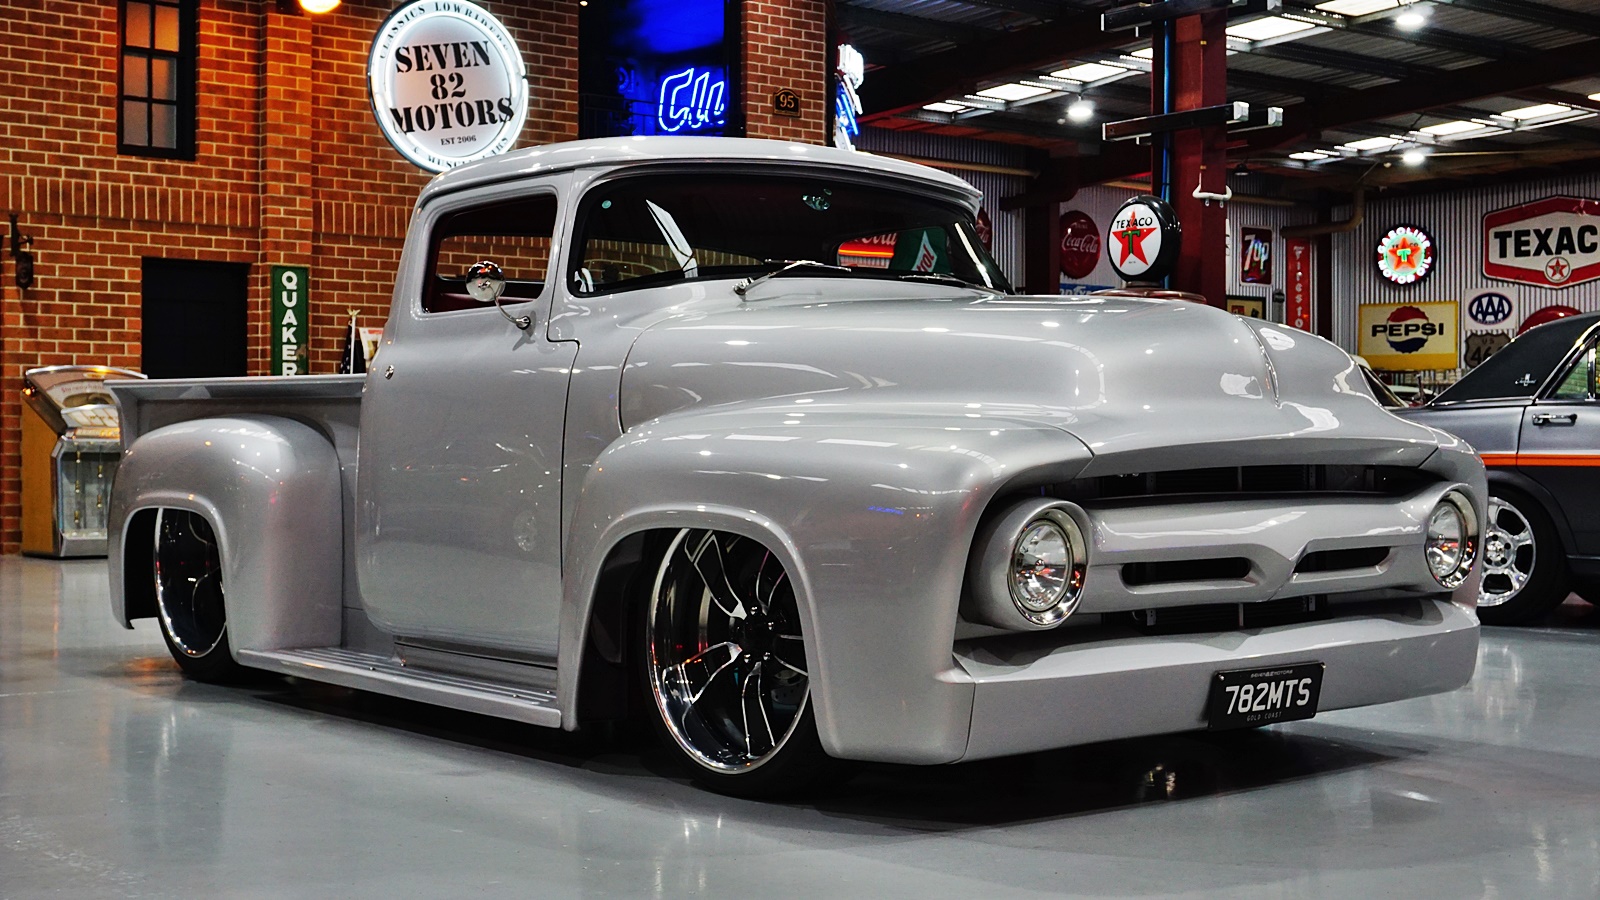 1956 Ford F100 Powering The Beast is a 600ci 800hp Big Block Ford V8 2.jpg